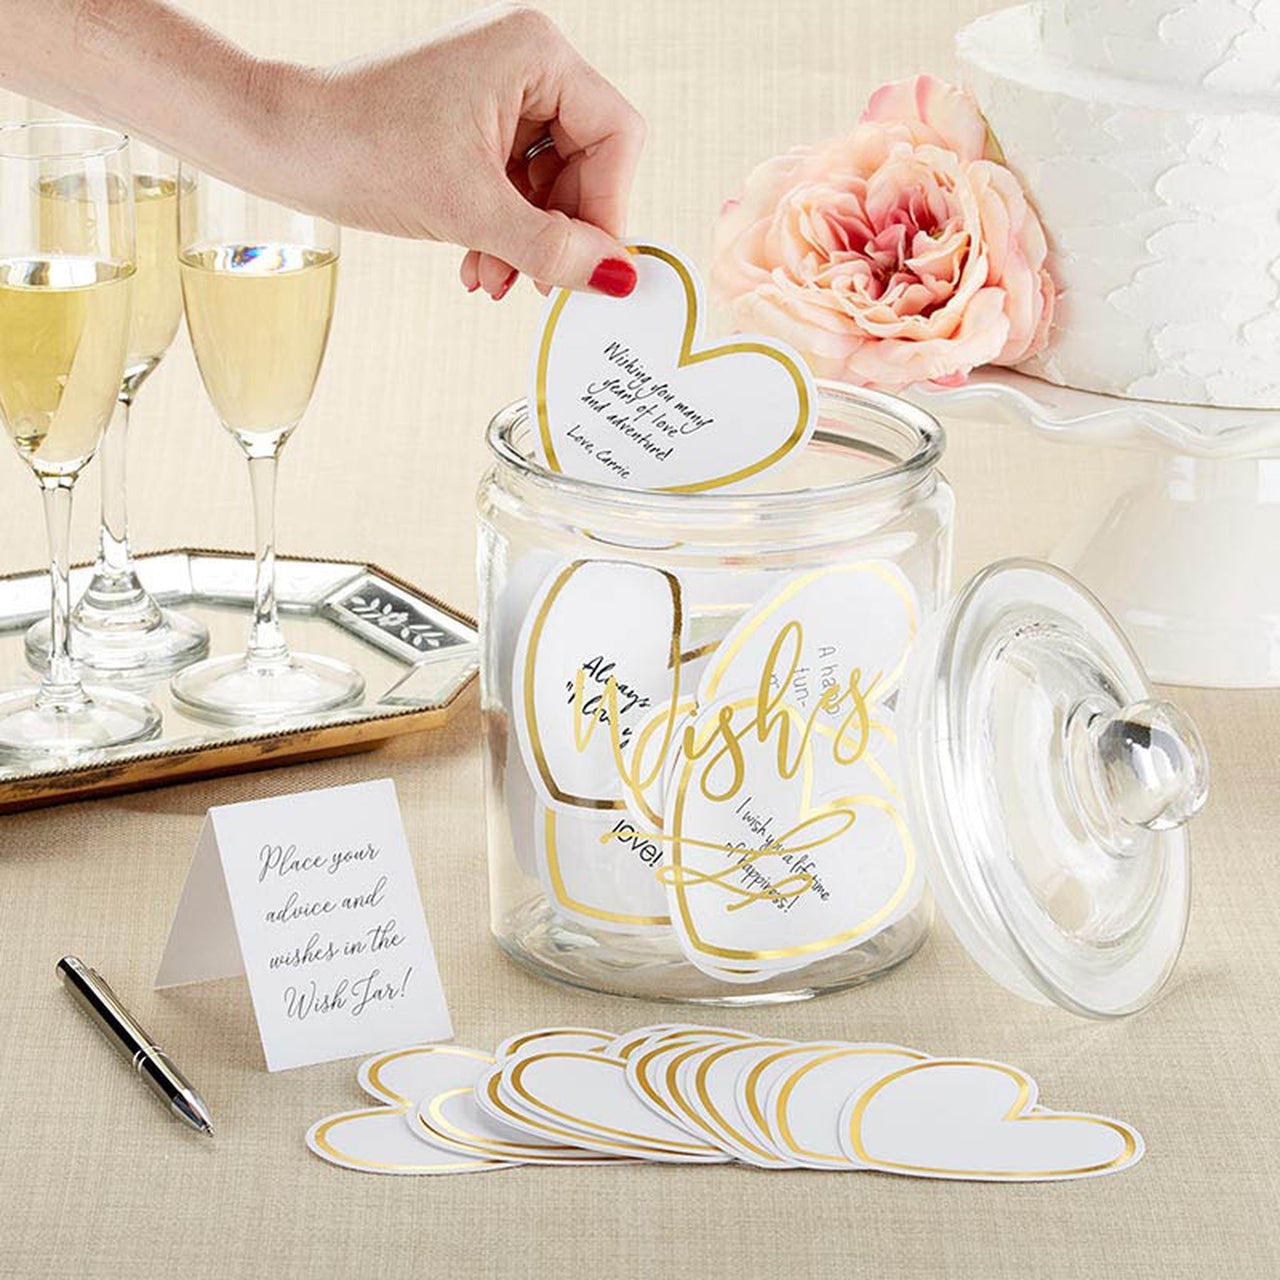 Heart Shaped Cards for Wish Jar (Set of 100) - Alternate Image 2 | My Wedding Favors